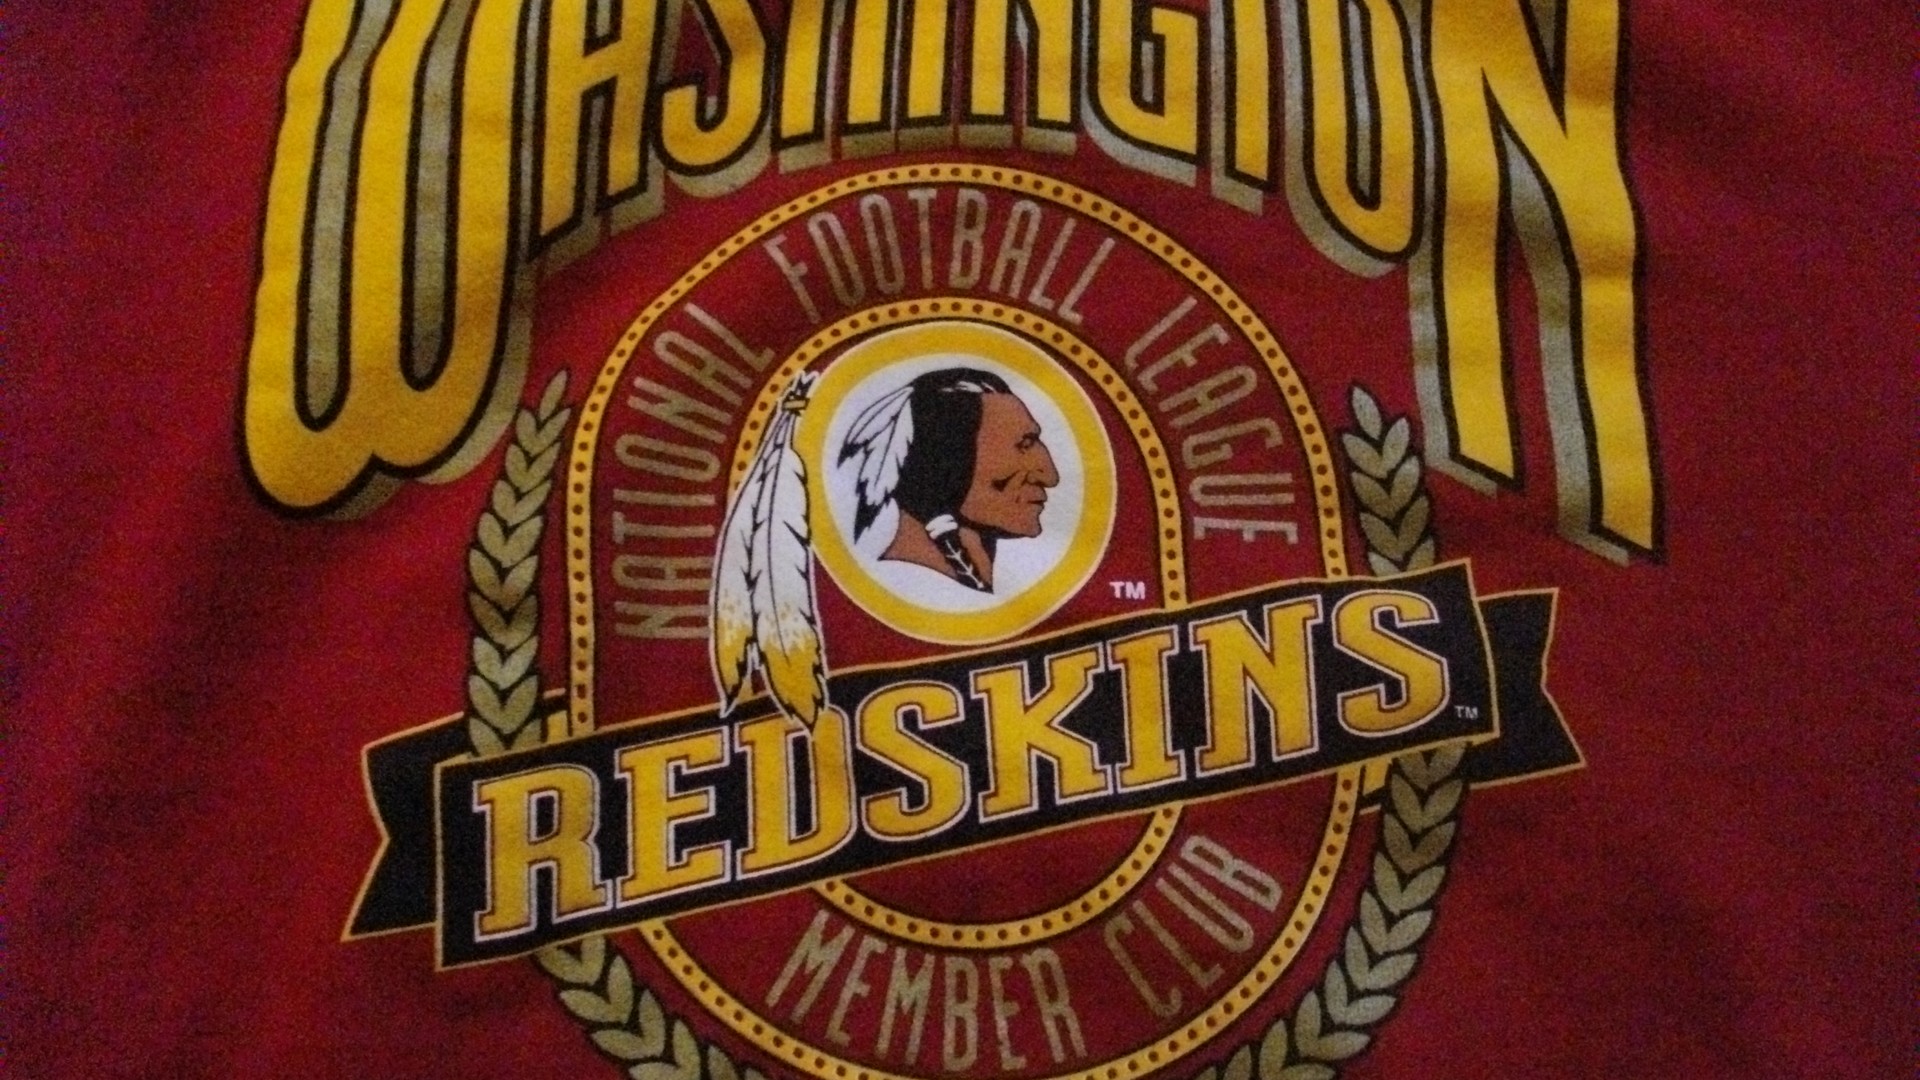 Washington Redskins Wallpaper For Mac Backgrounds With high-resolution 1920X1080 pixel. You can use this wallpaper for your Mac or Windows Desktop Background, iPhone, Android or Tablet and another Smartphone device